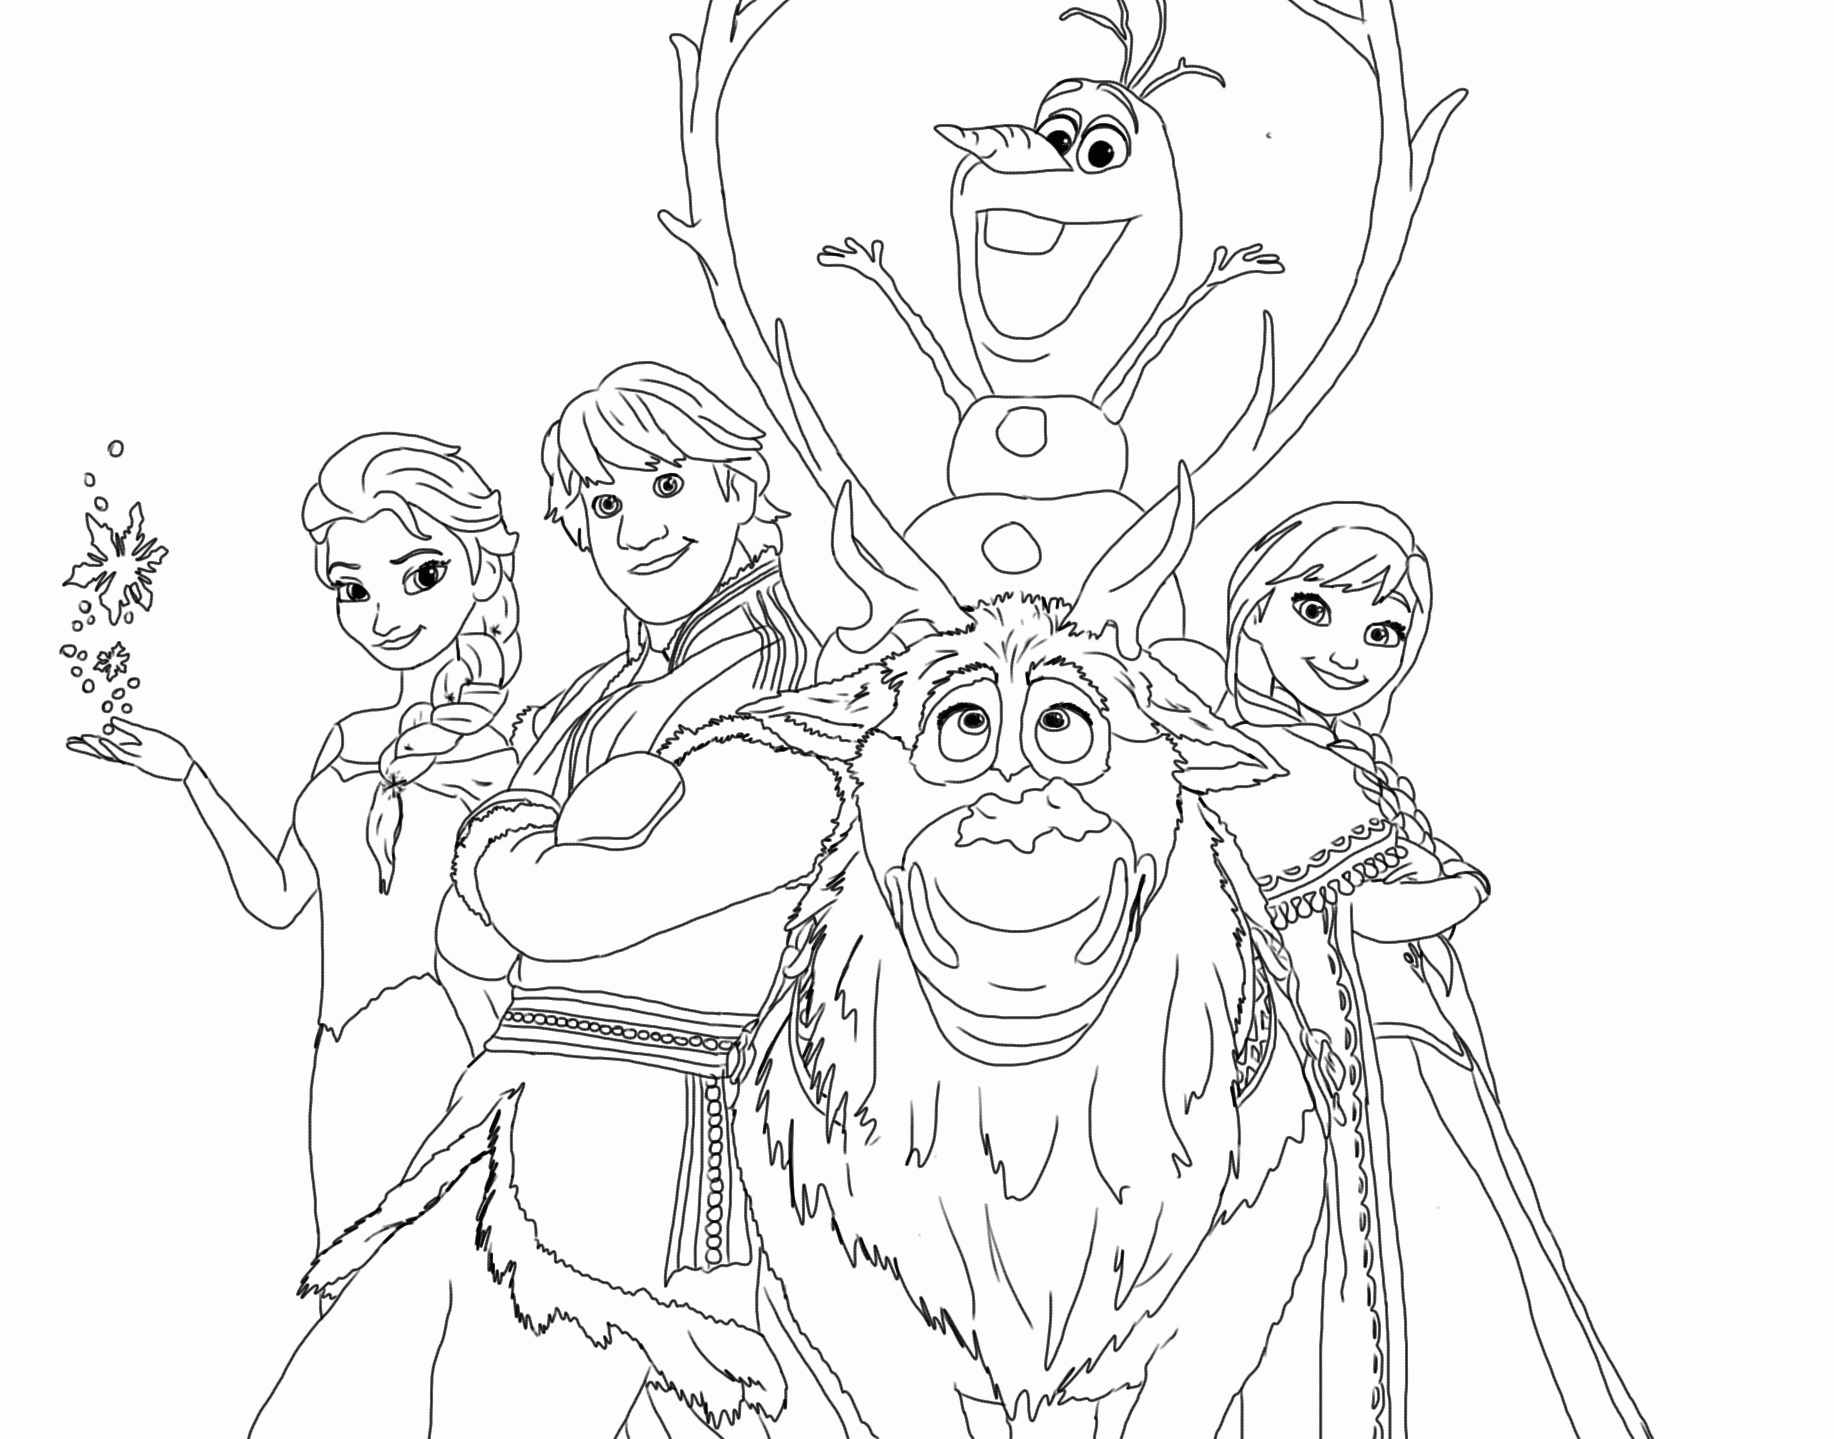 Frozen Coloring Pages Pdf - Coloring Home - Free Printable Frozen Coloring Pages